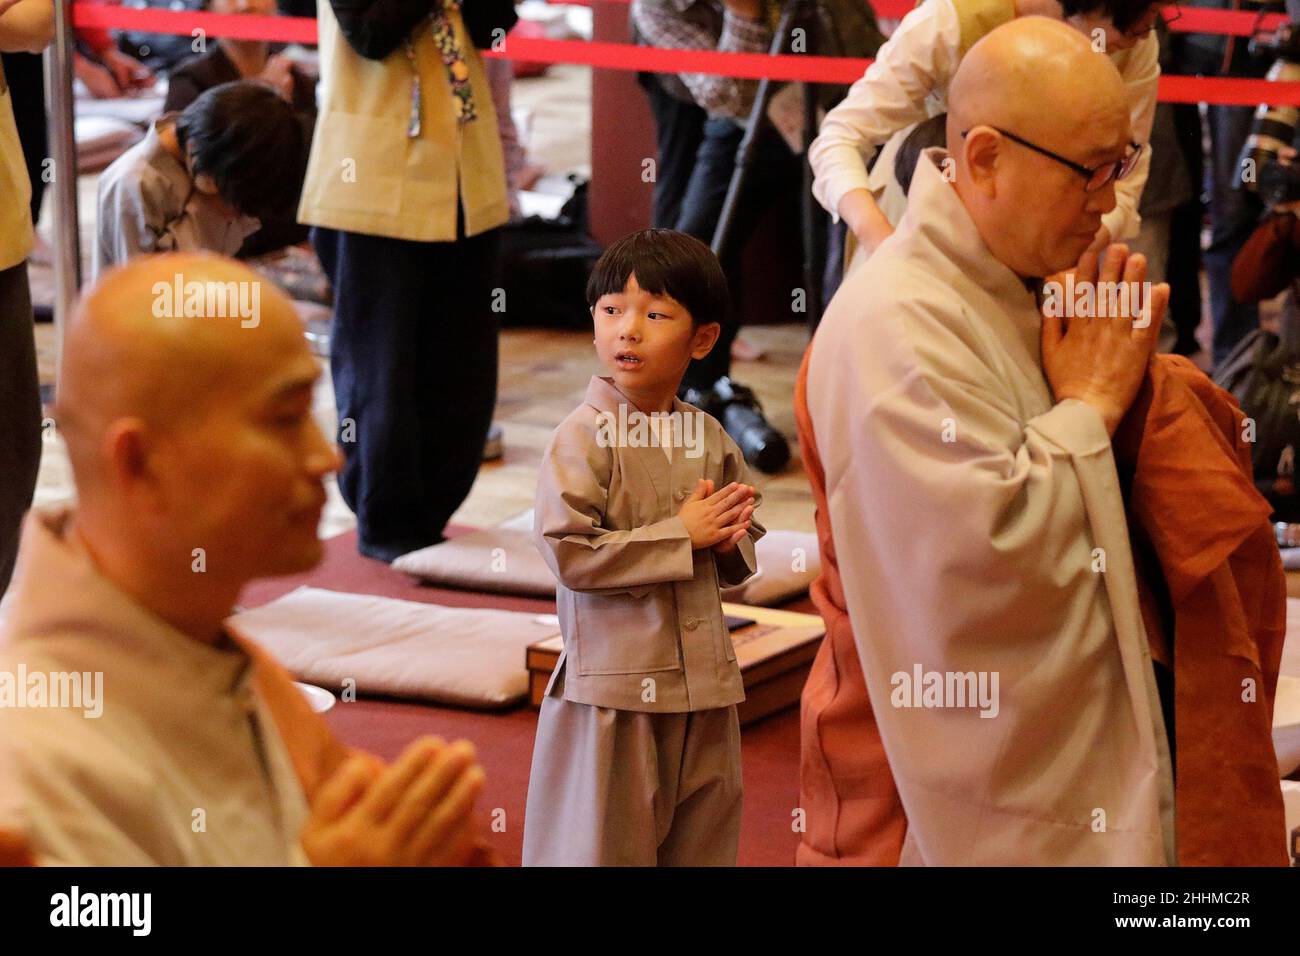 May 2, 2018-Seoul, South Korea-A child gets his head shaved by a Buddhist monk during the 'Children Becoming Buddhist Monks' ceremony forthcoming buddha's birthday at a Chogye temple in Seoul, South Korea. Children have their hair shaved off during the 'Children Becoming Buddhist Monks' ceremony ahead of buddha's birthday at a Chogye temple. The children will stay at the temple to learn about Buddhism for 20 days. Buddha was born approximately 2,562 years ago, and although the exact date is unknown, Buddha's official birthday is celebrated on the full moon in May in South Korea, which is on Ma Stock Photo